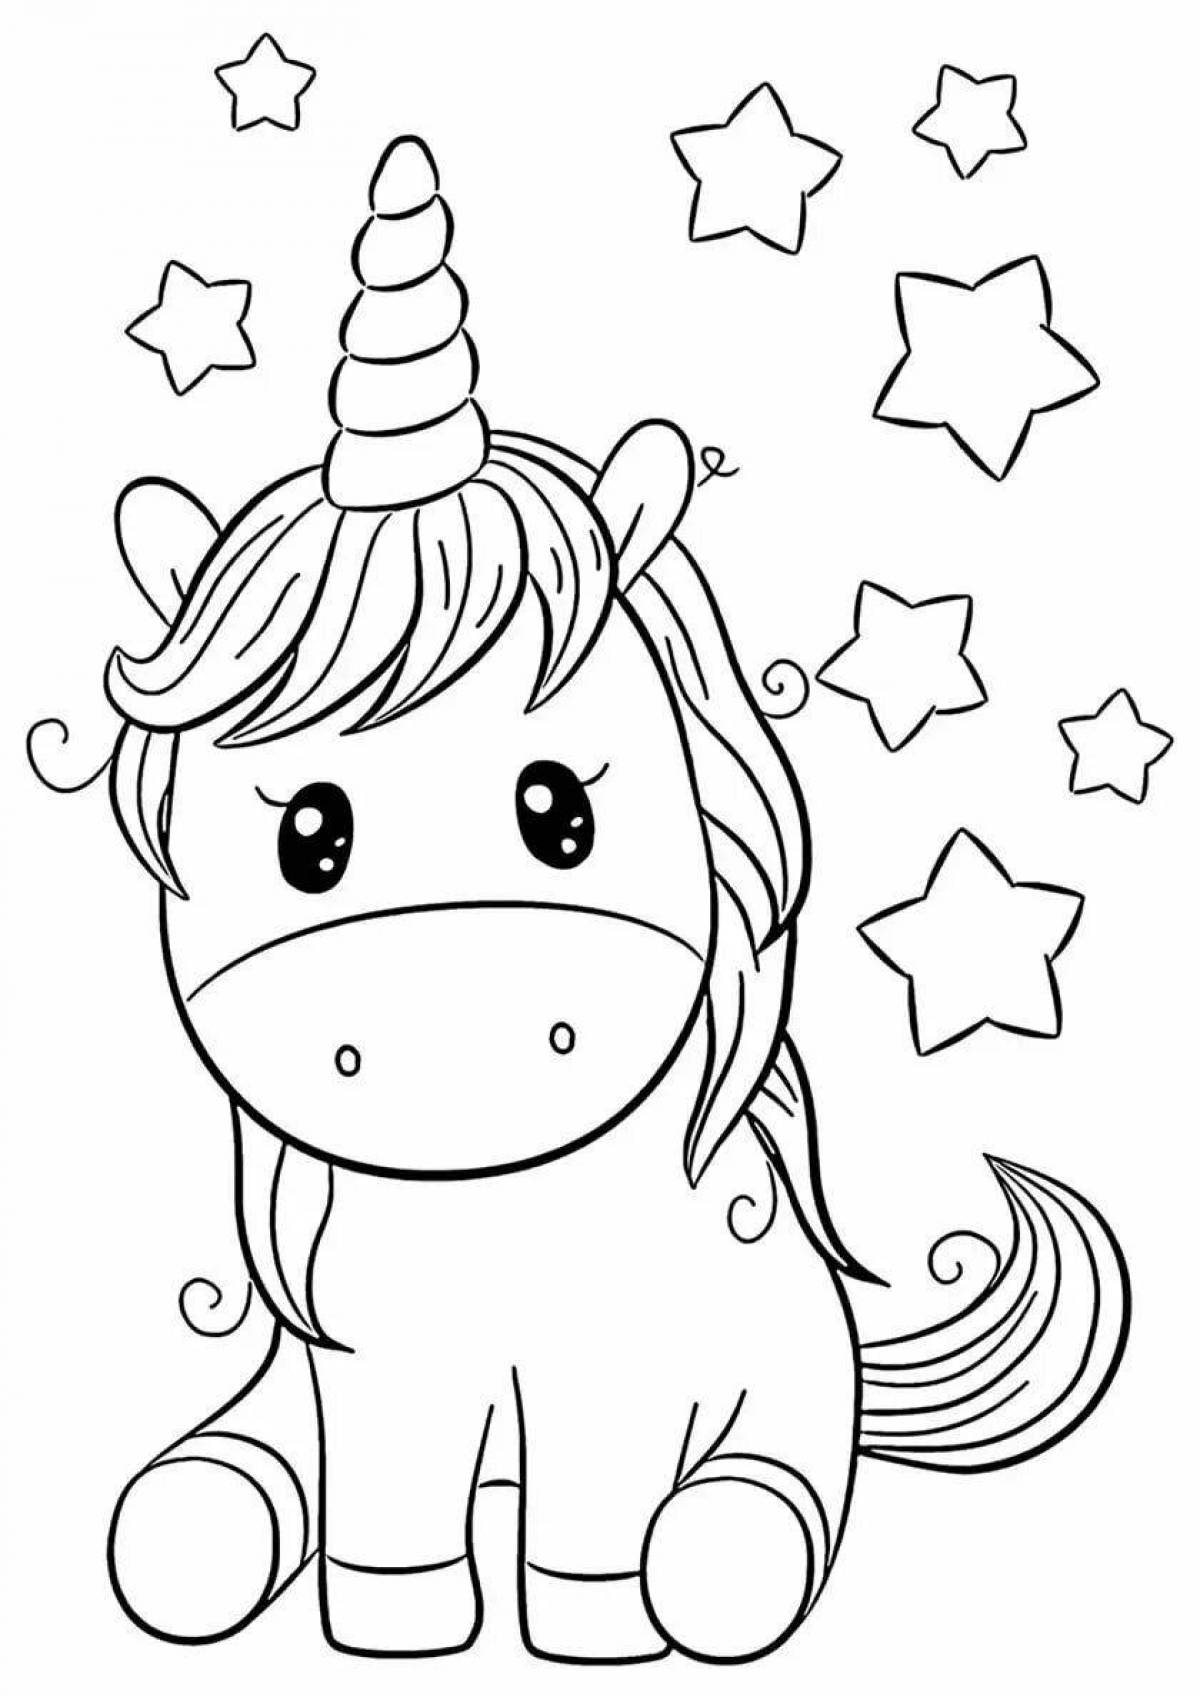 Fairytale coloring book for girls 6 years old unicorn